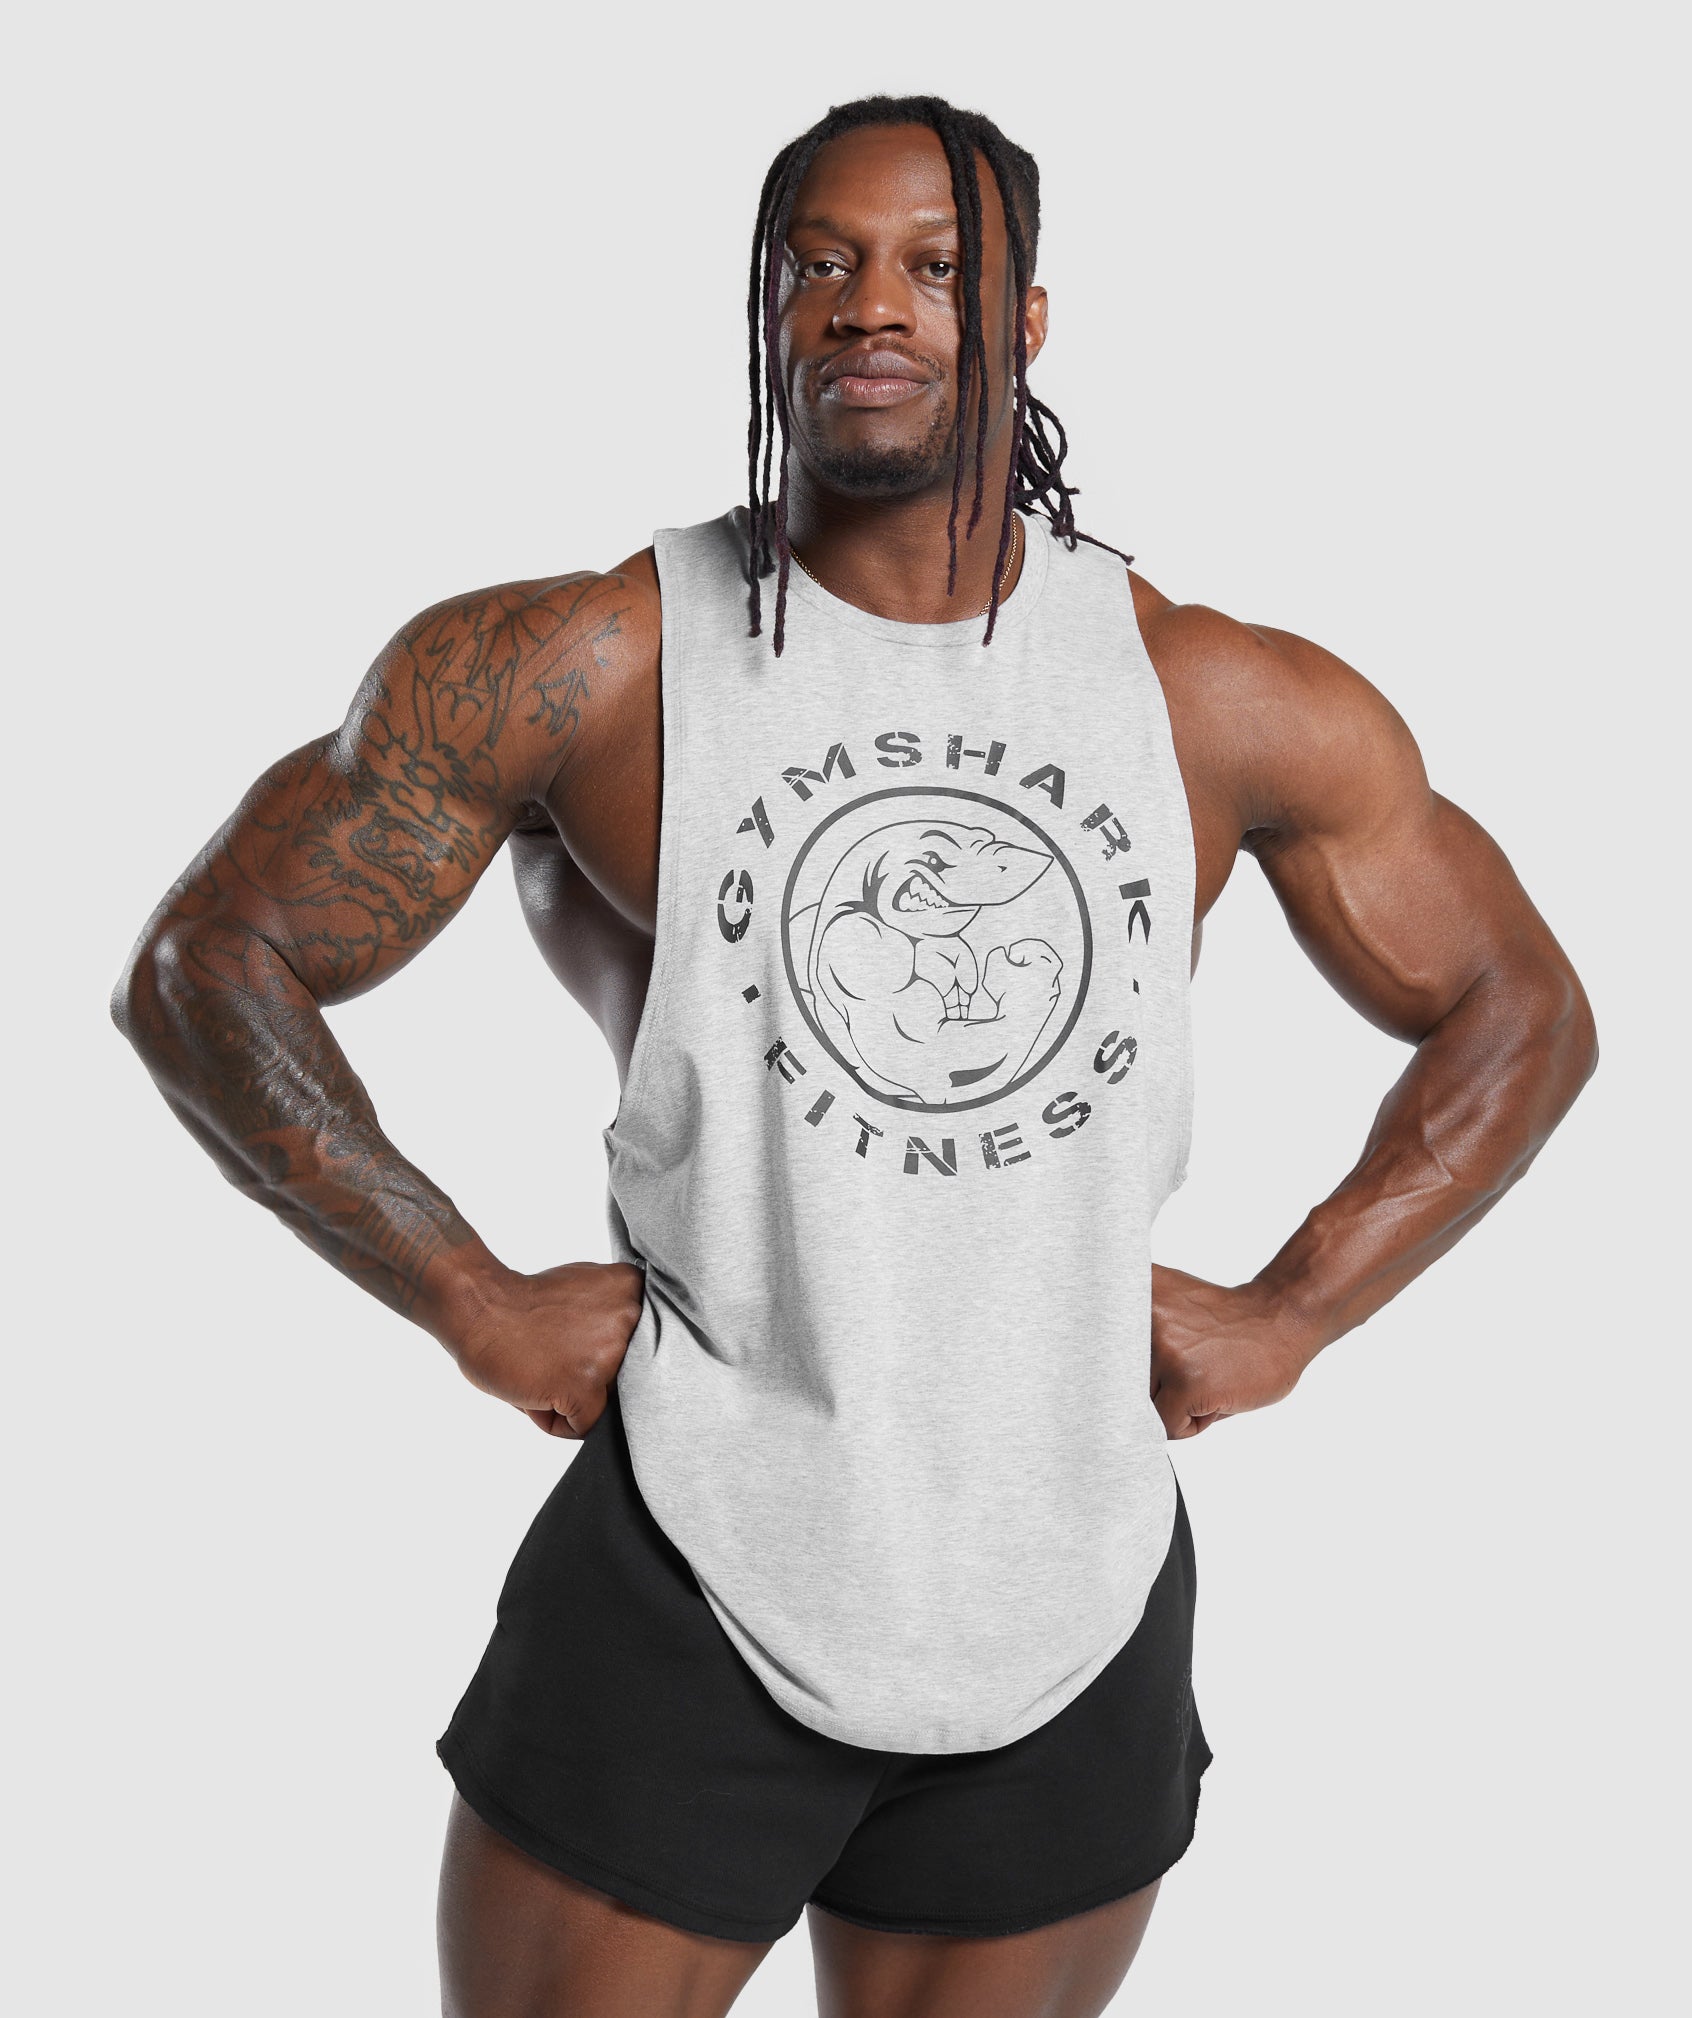 I HAVE ABS Workout Tank Top Heather Gray, Workout Shirts, Gym Tank